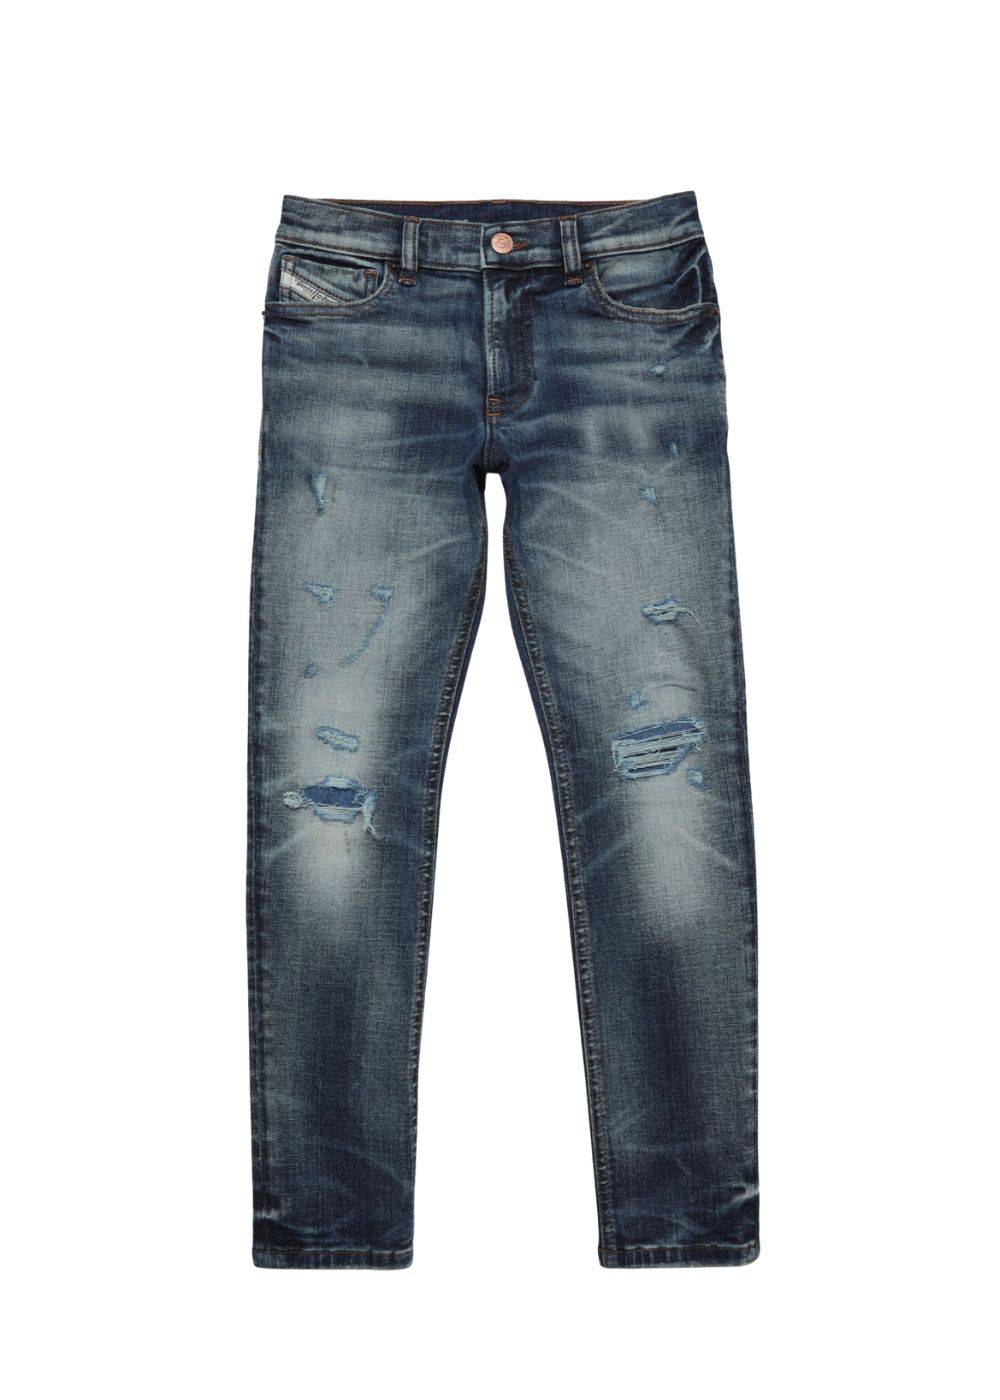 Featured image for “Diesel Jeans In Denim”